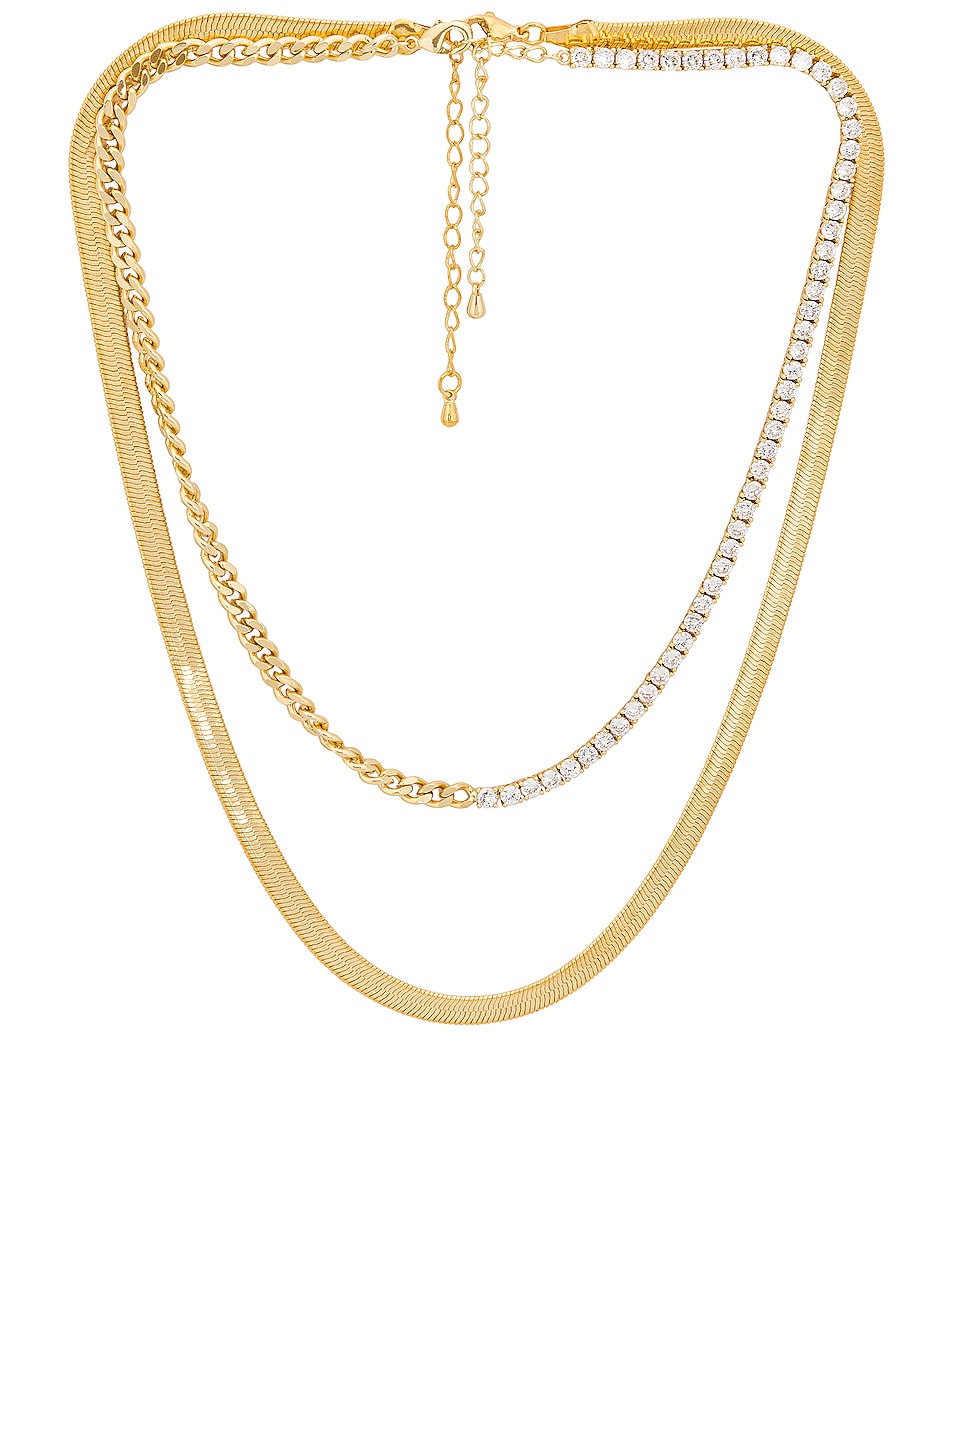 Image 1 of Jordan Road Jewelry Singapore Necklace Stack in Gold